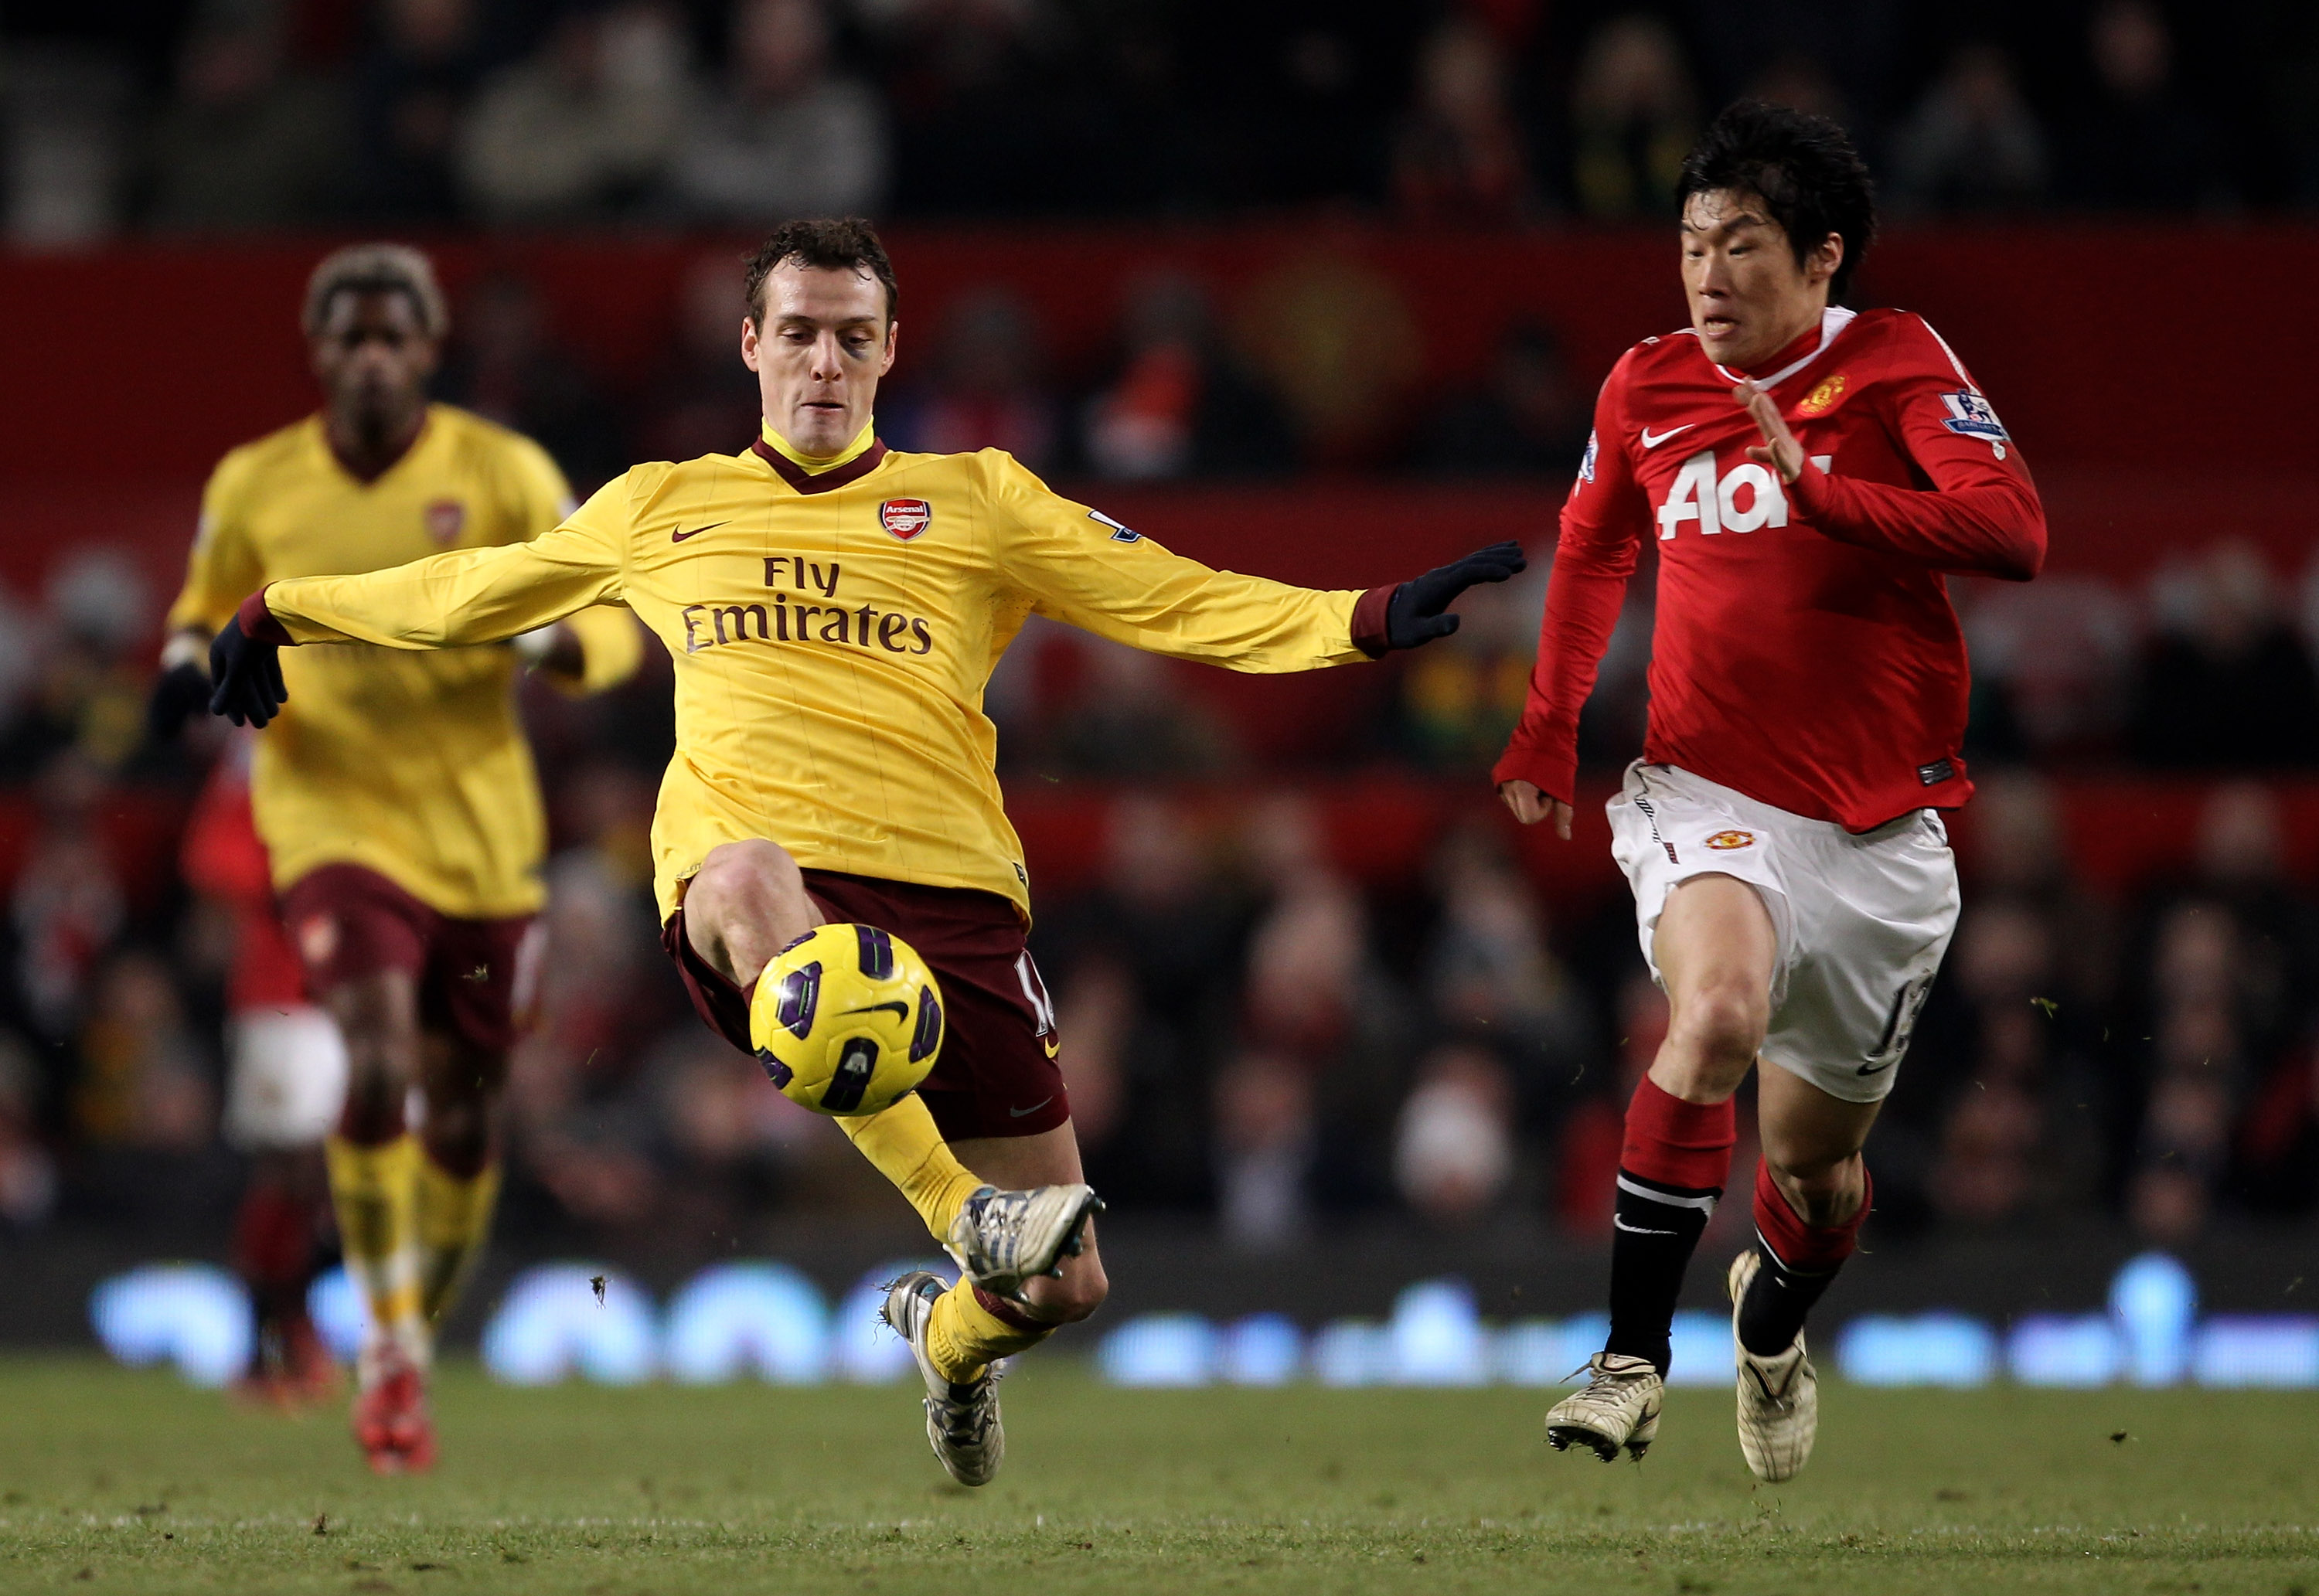 MANCHESTER, ENGLAND - DECEMBER 13:  Sebastian Squillaci of Arsenal competes with Ji-Sung Park of Manchester United during the Barclays Premier League match between Manchester United and Arsenal at Old Trafford on December 13, 2010 in Manchester, England.